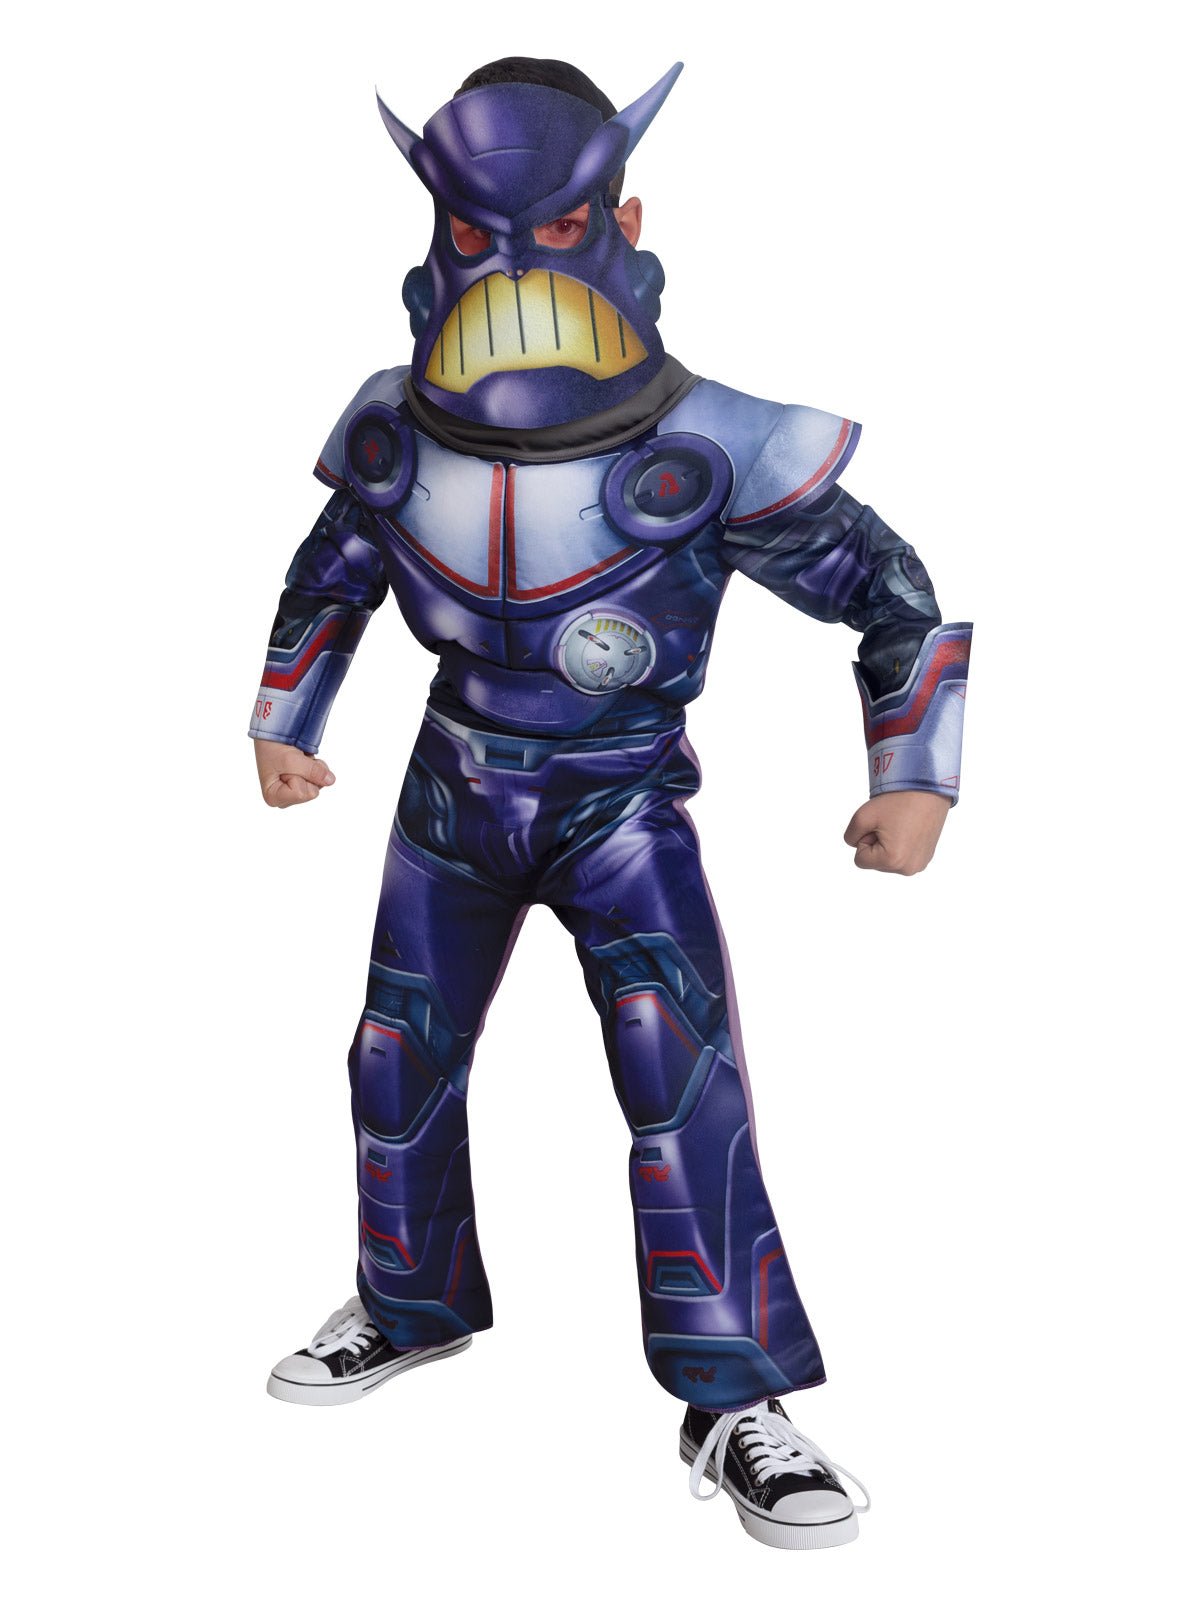 Full view of the Zurg Deluxe 'Lightyear Movie' Costume for children